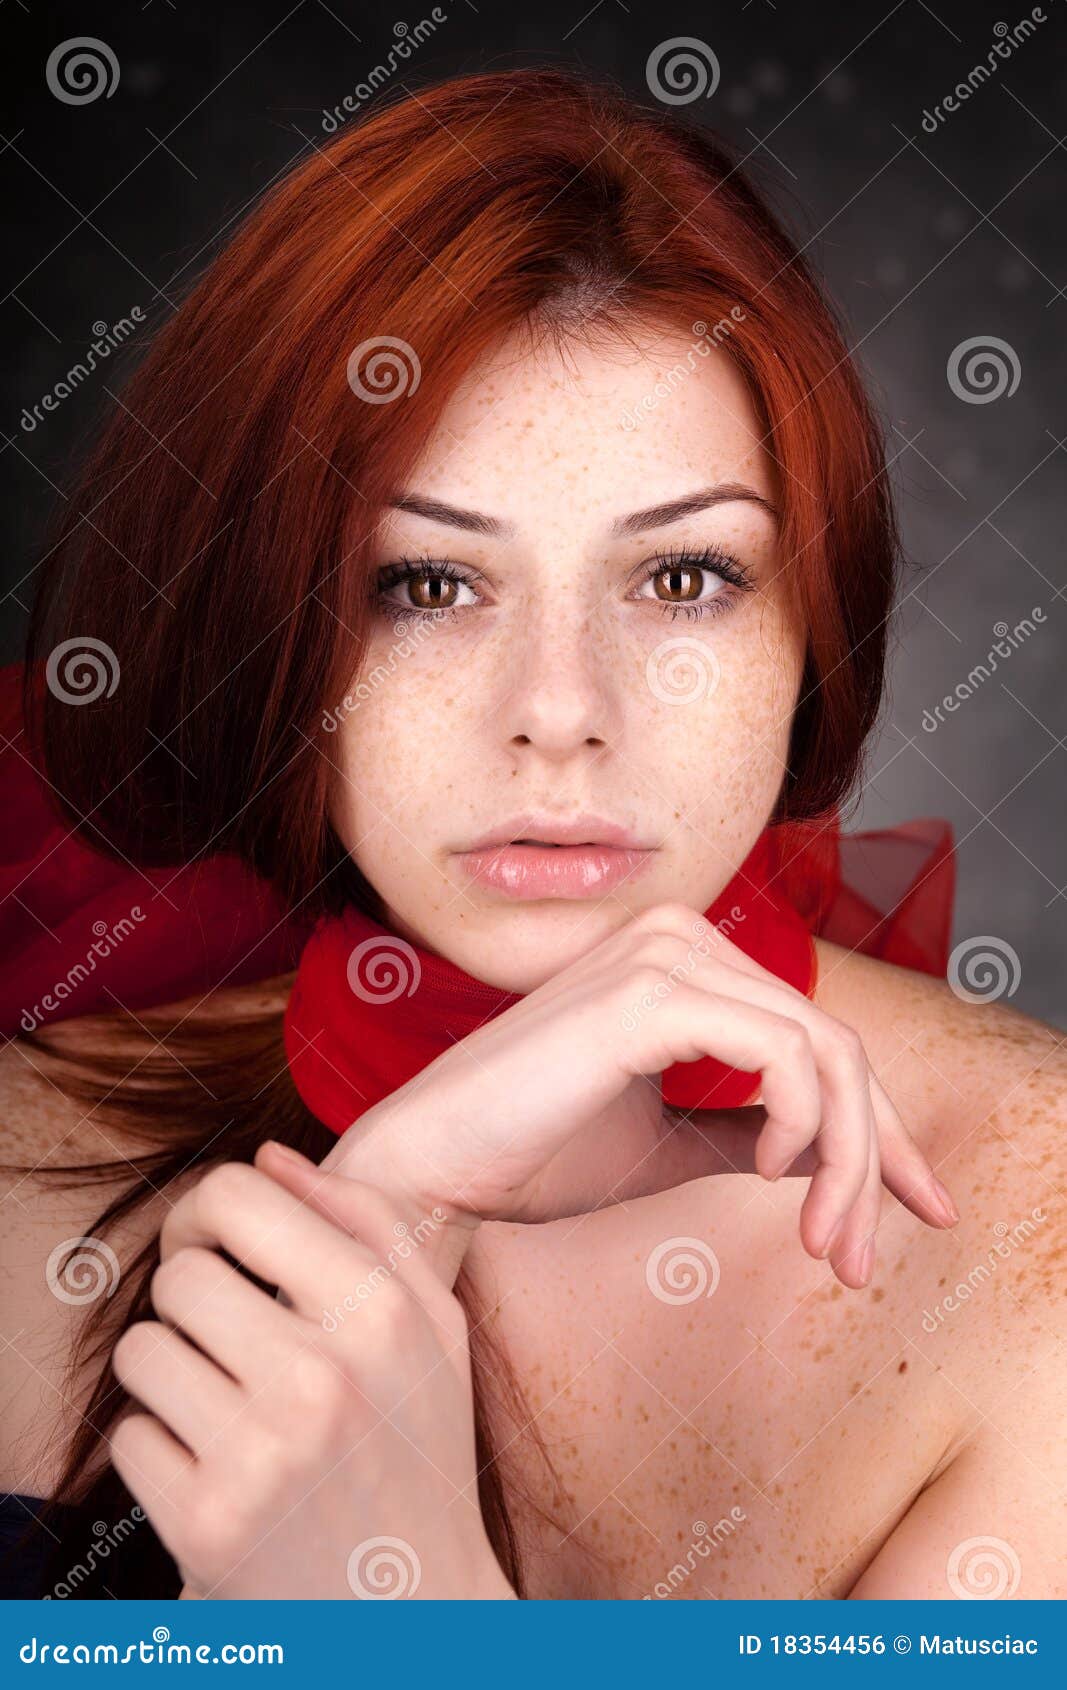 beautiful woman with red hair and freckles